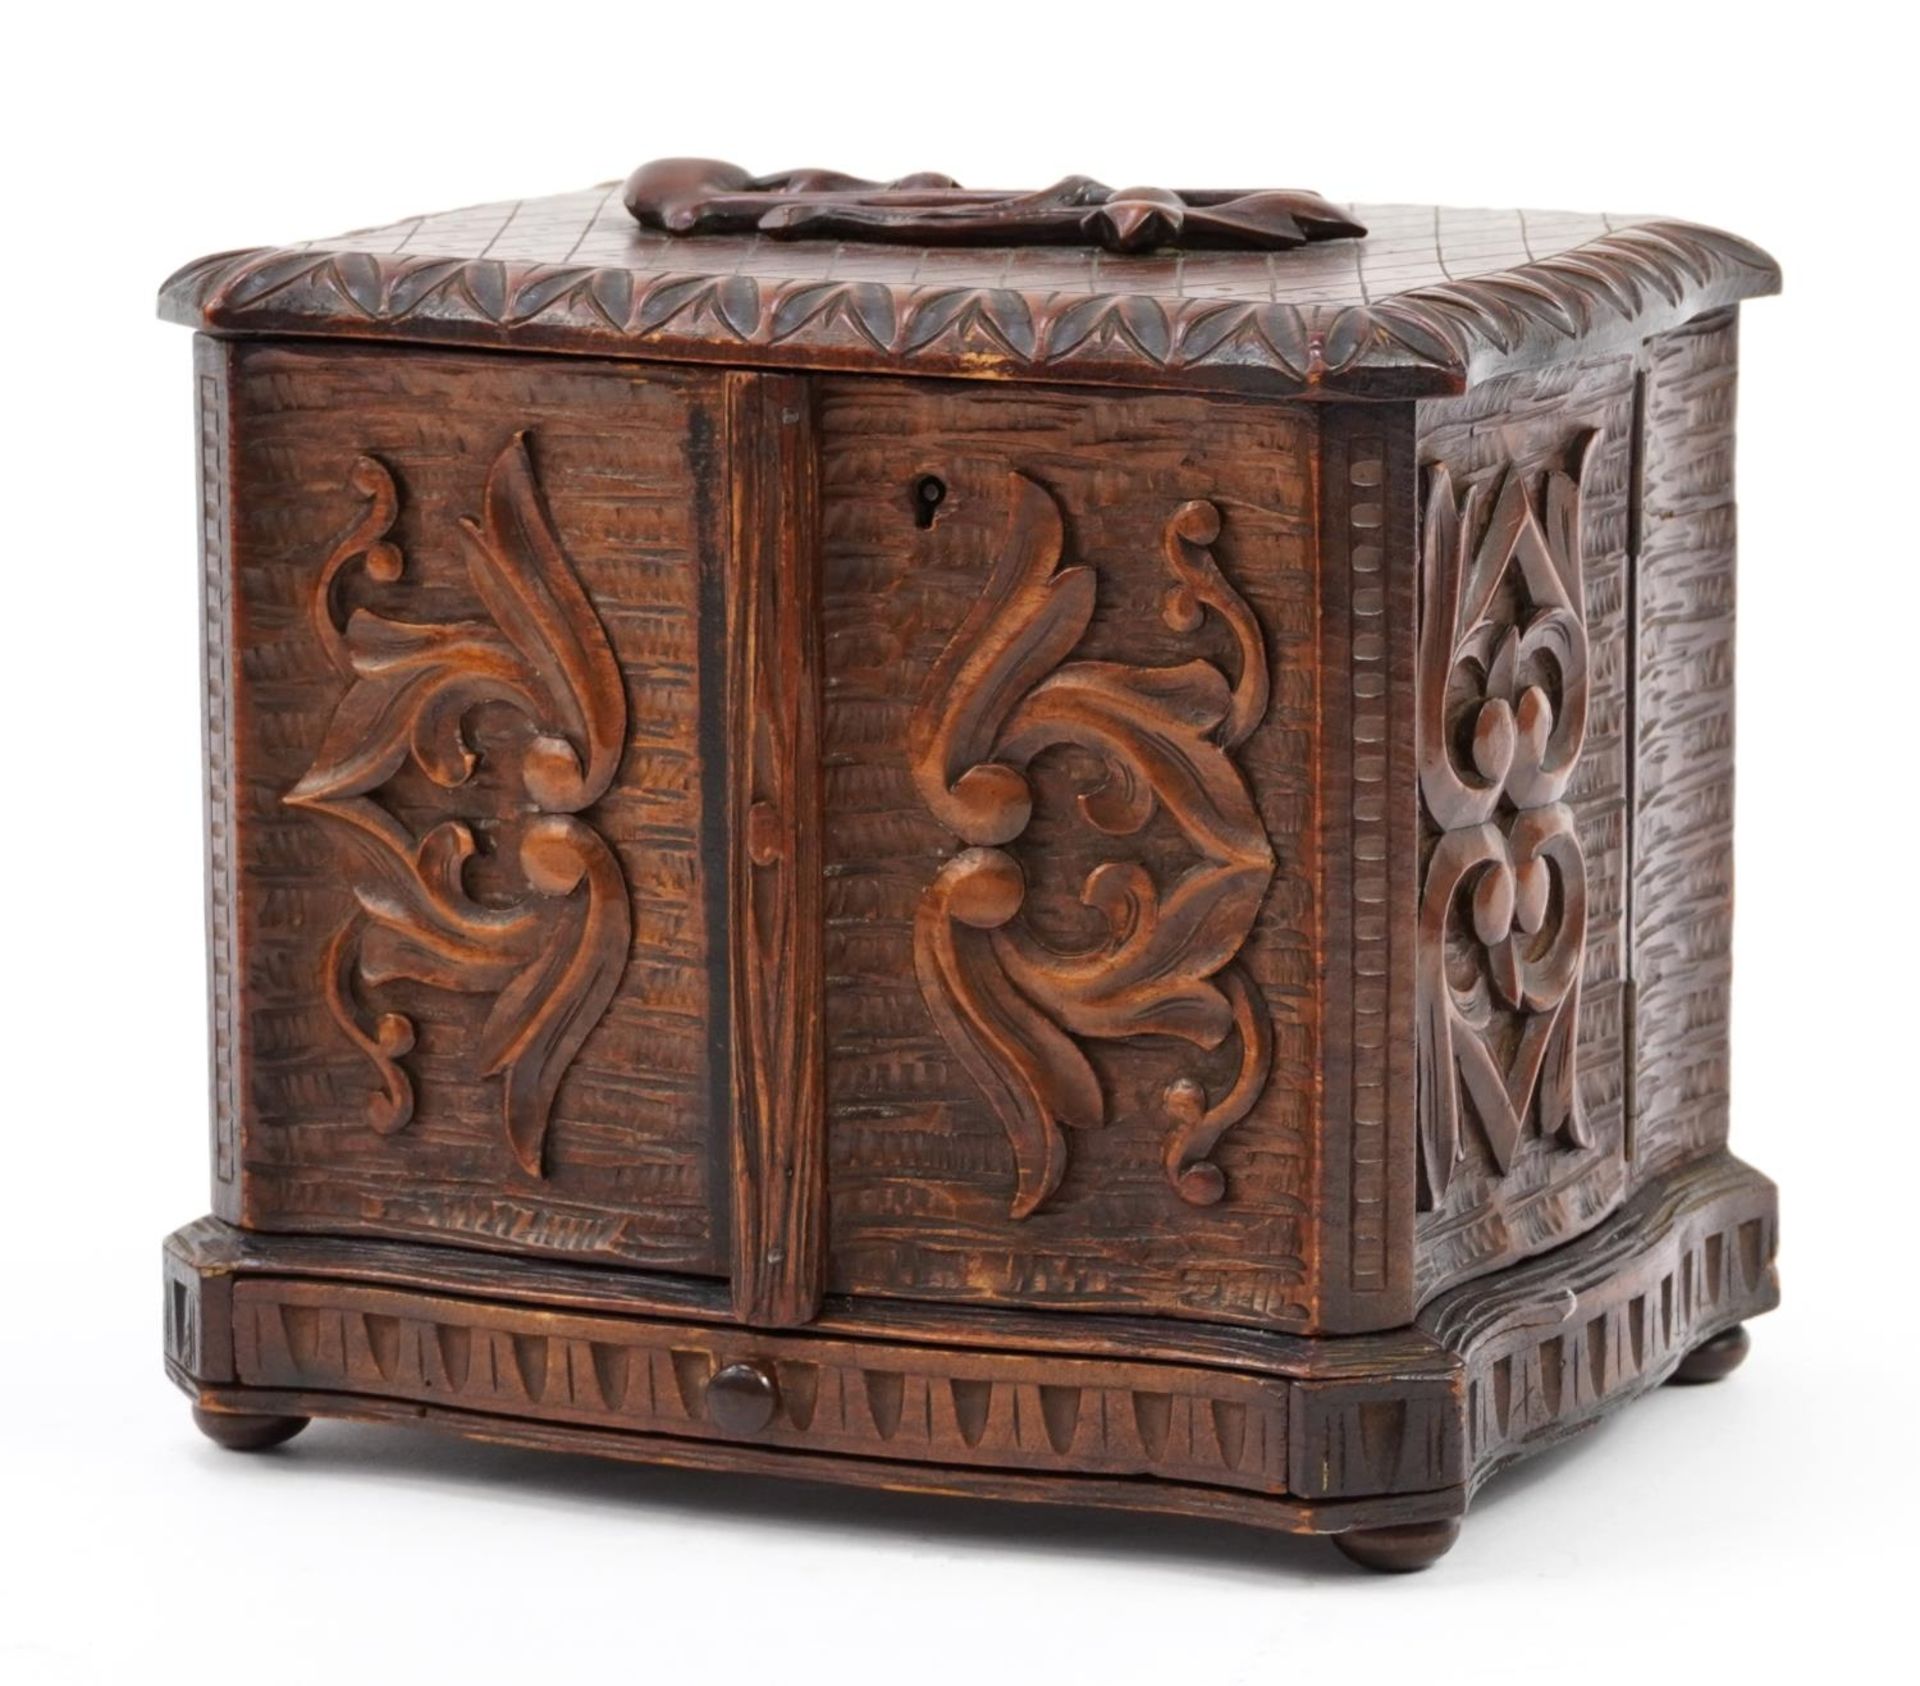 Black Forest carved wood smoker's pipe box with base drawer, 18.5cm H x 21.5cm W x 17.5cm D